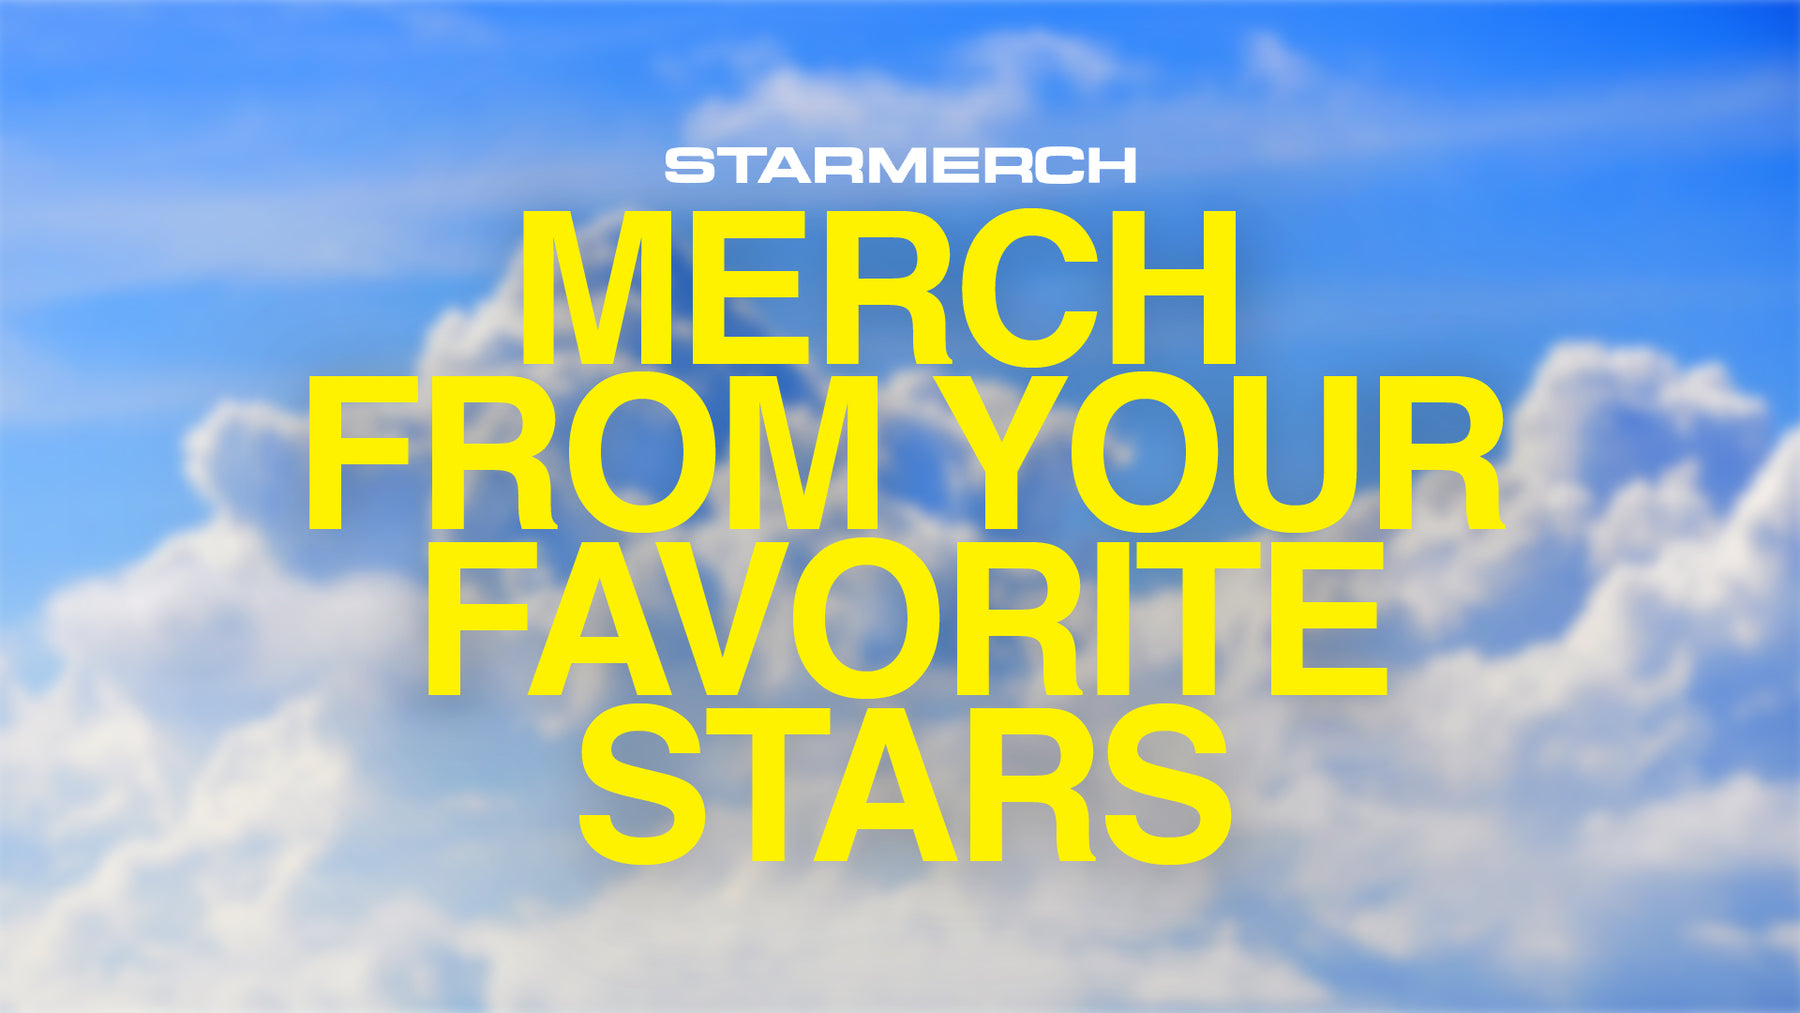 StarMerch From Your Favorite Stars